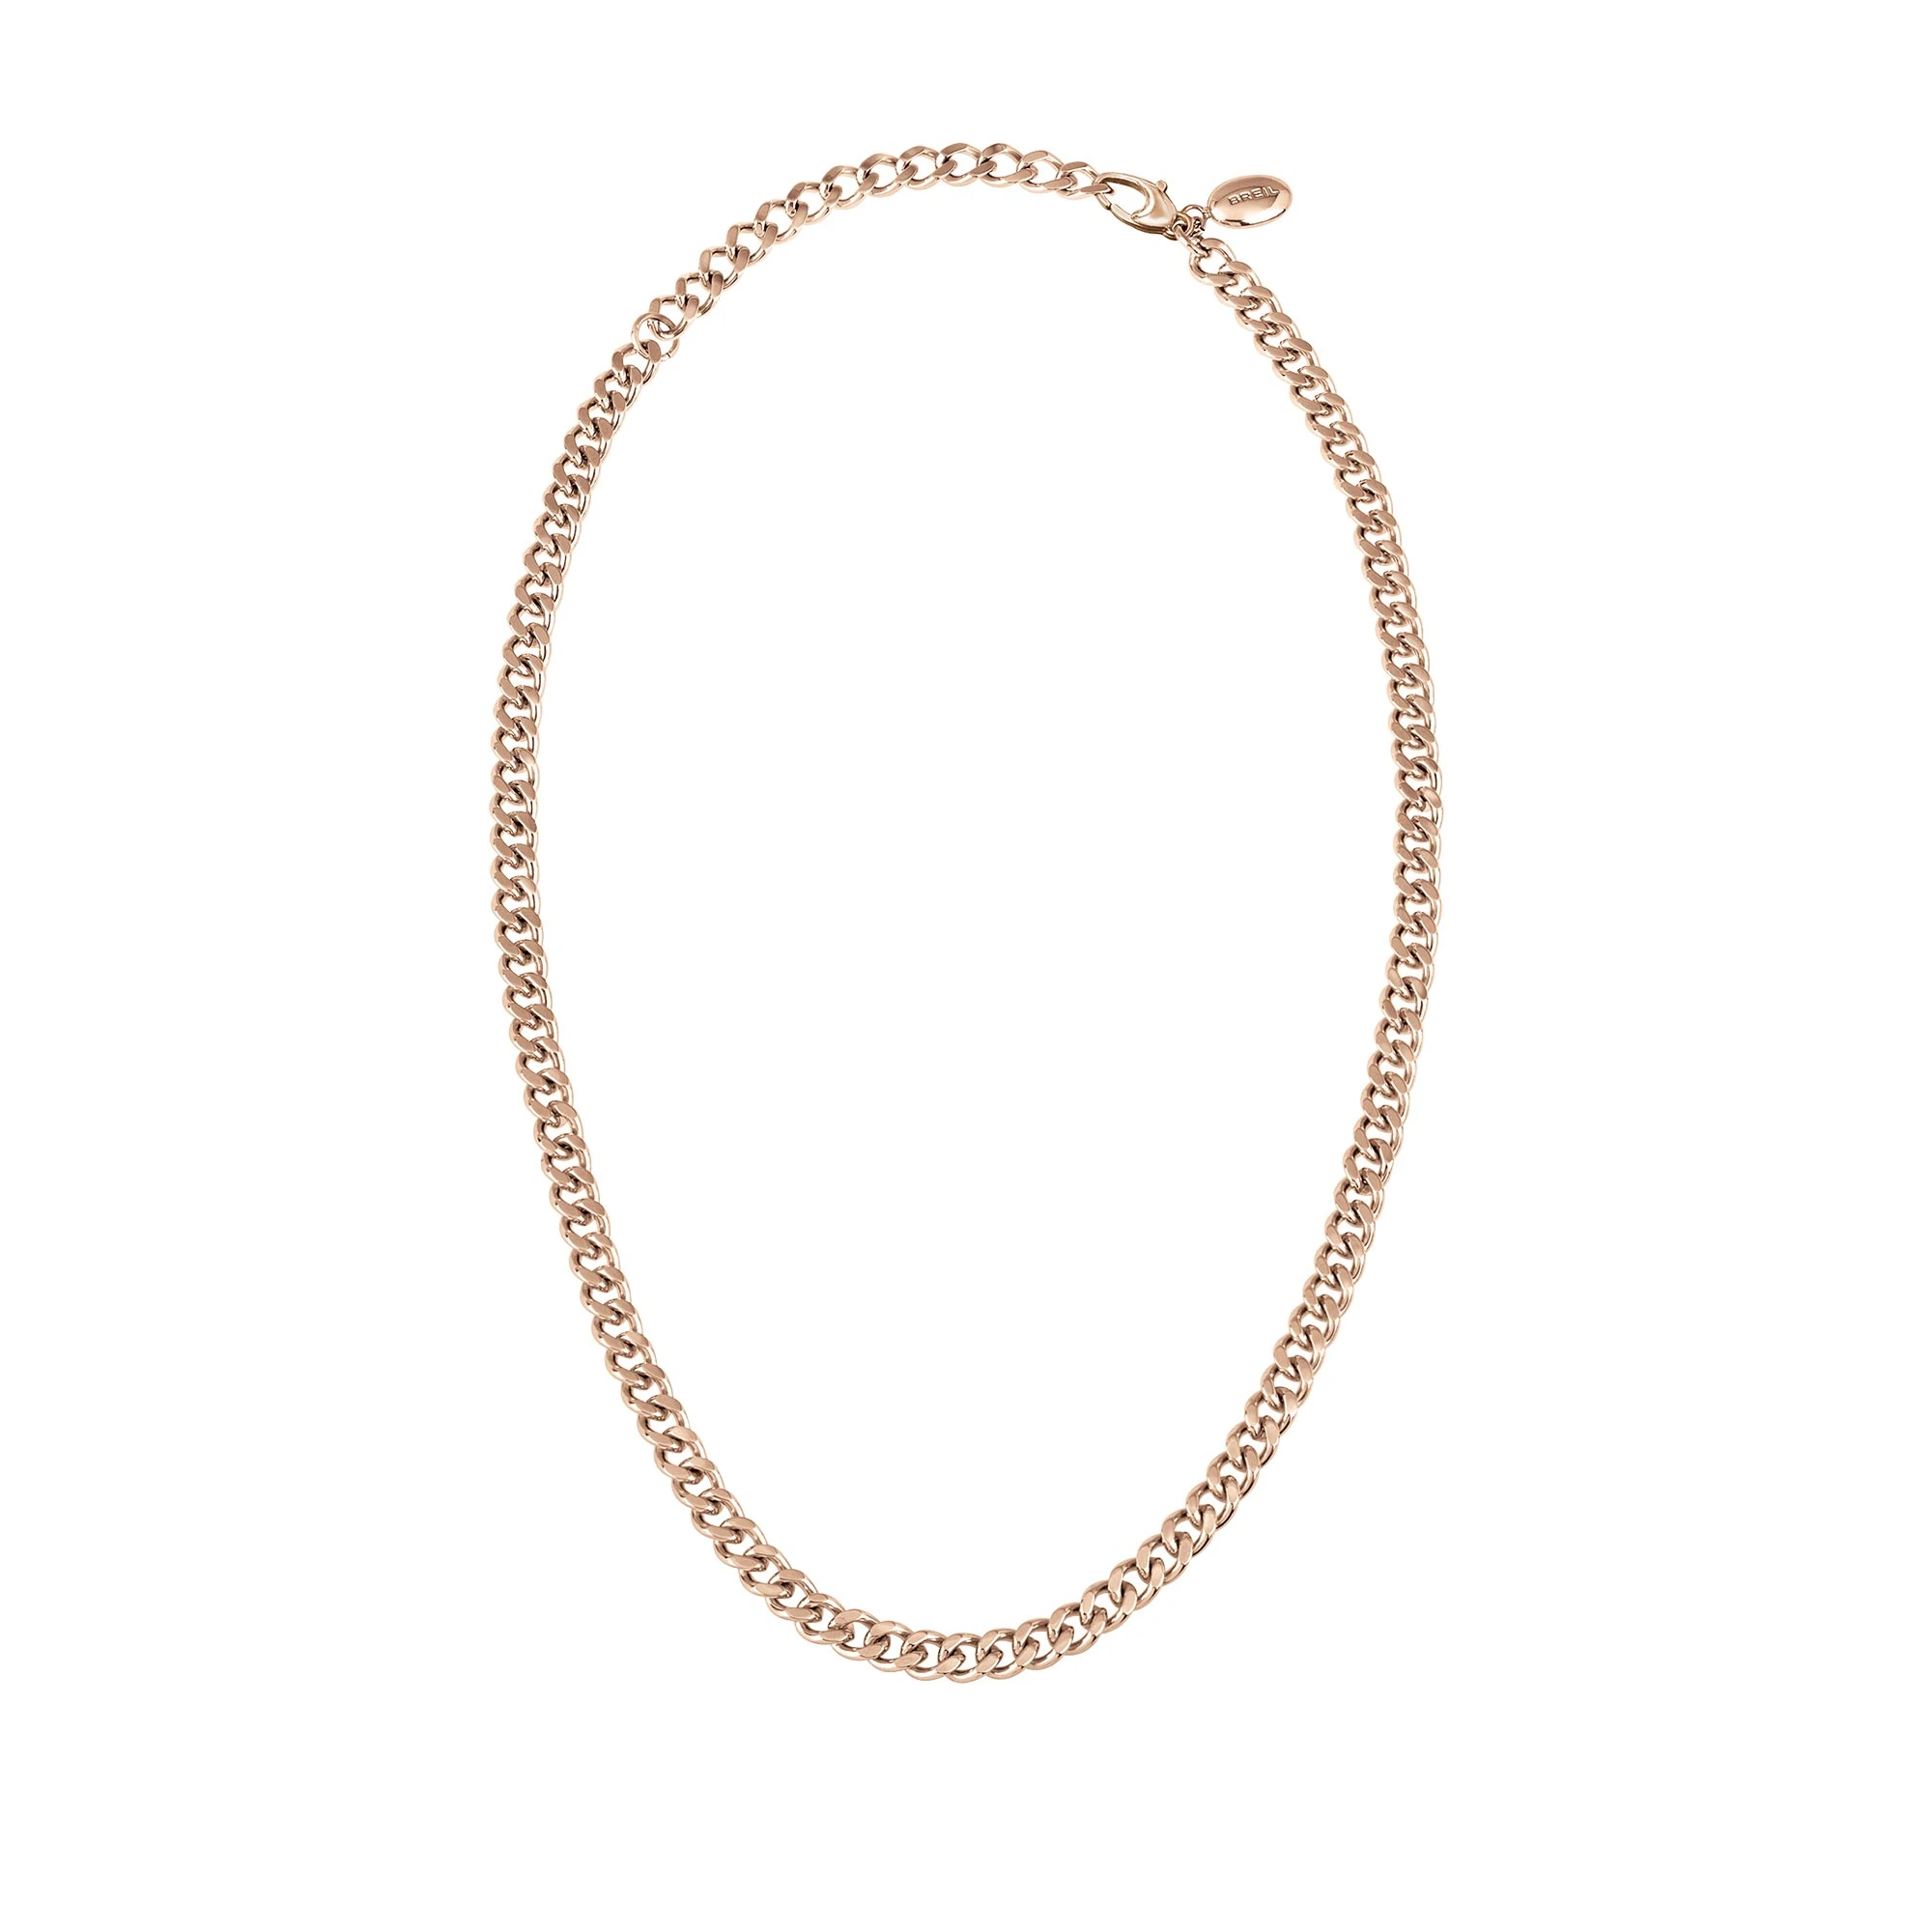 JOIN UP - IP ROSE POLISHED STEEL CHAIN NECKLACEIP ROSE POLISHED STEEL CHAIN NECKLACE - 1 - TJ2915 | Breil